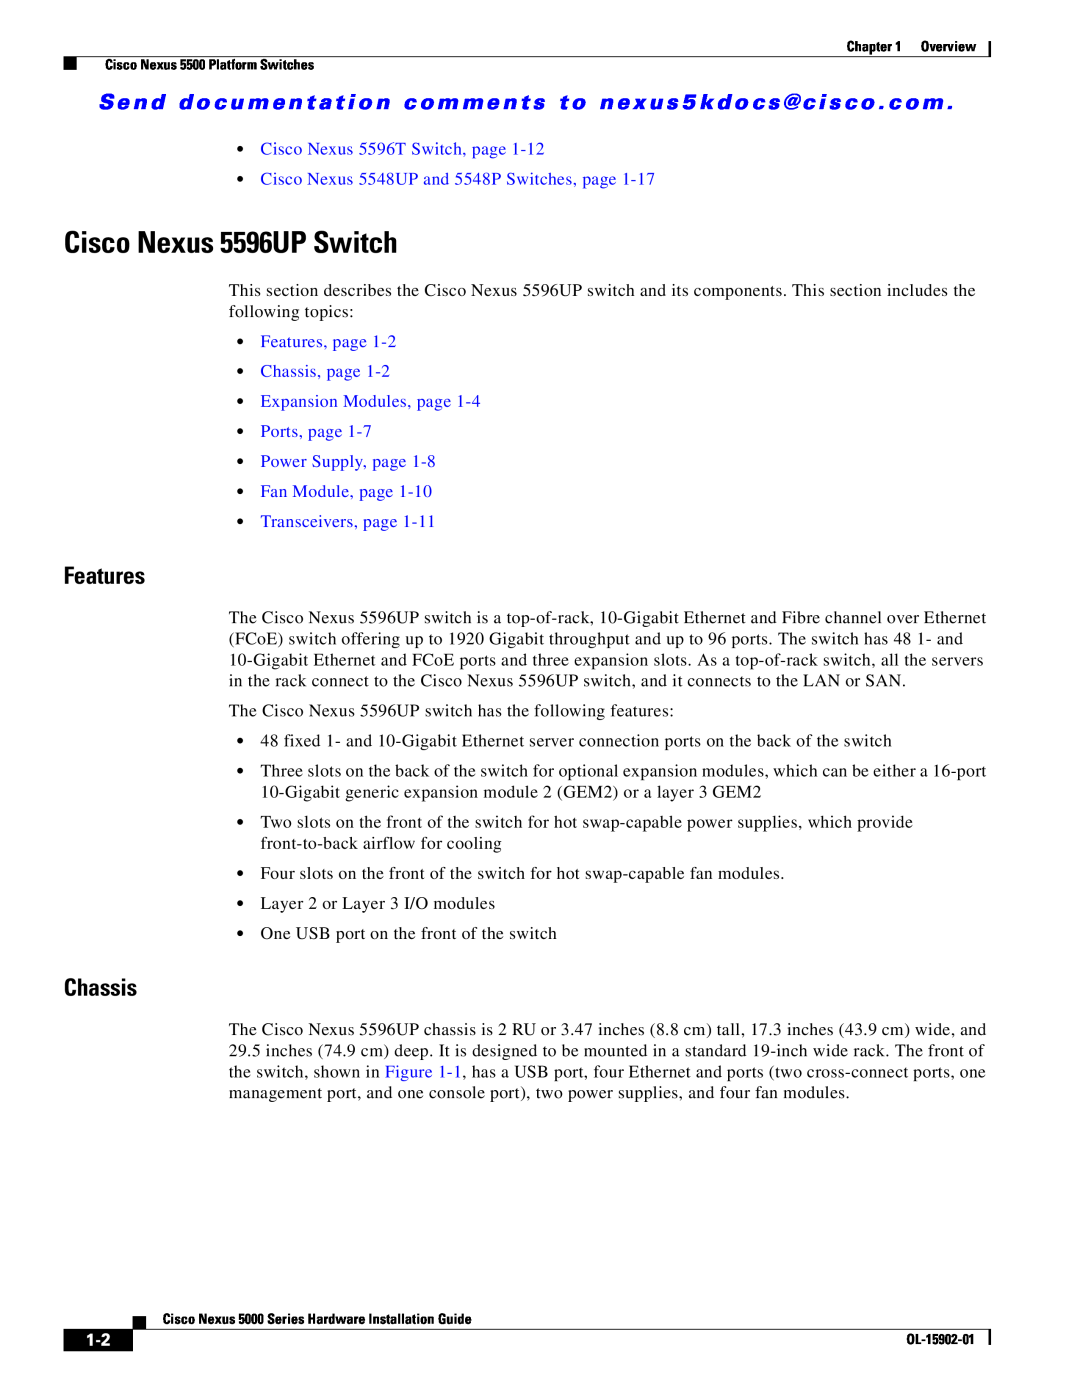 Cisco Systems 5000 manual Cisco Nexus 5596UP Switch, Features, Chassis, Cisco Nexus 5596T Switch, page 